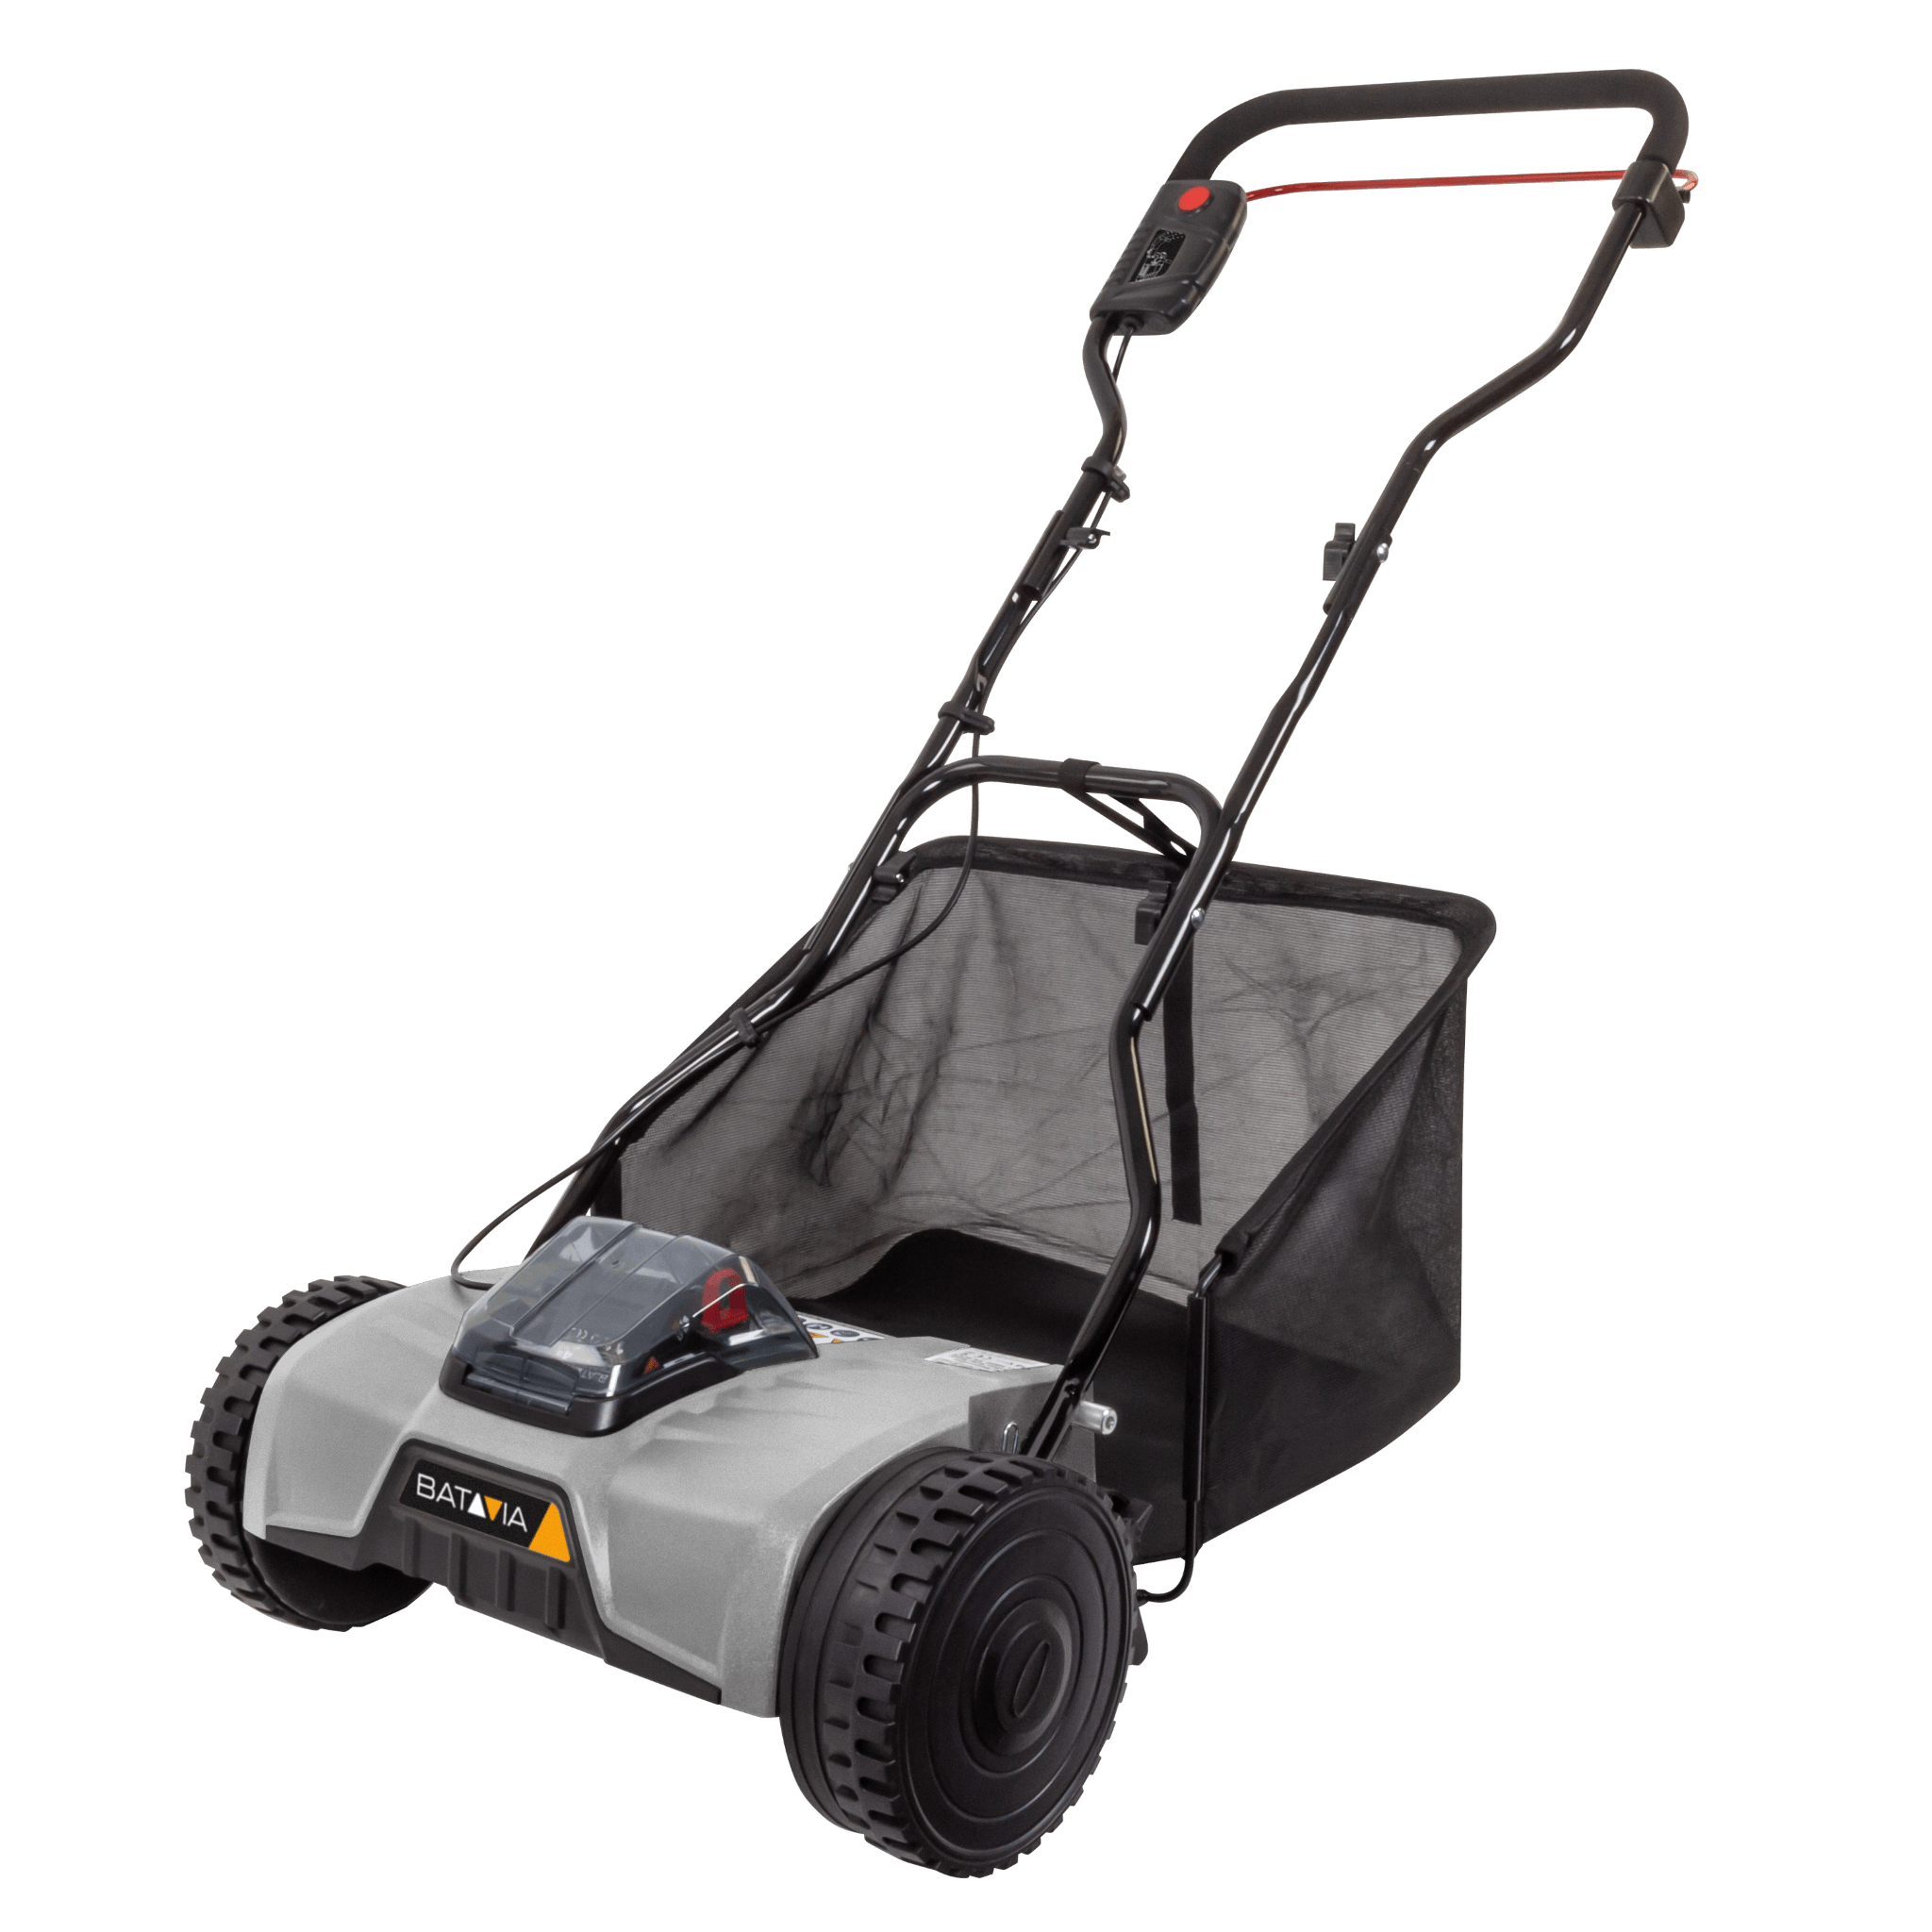 Cylinder Lawn Mower | 18V Maxxpack collection | Batavia